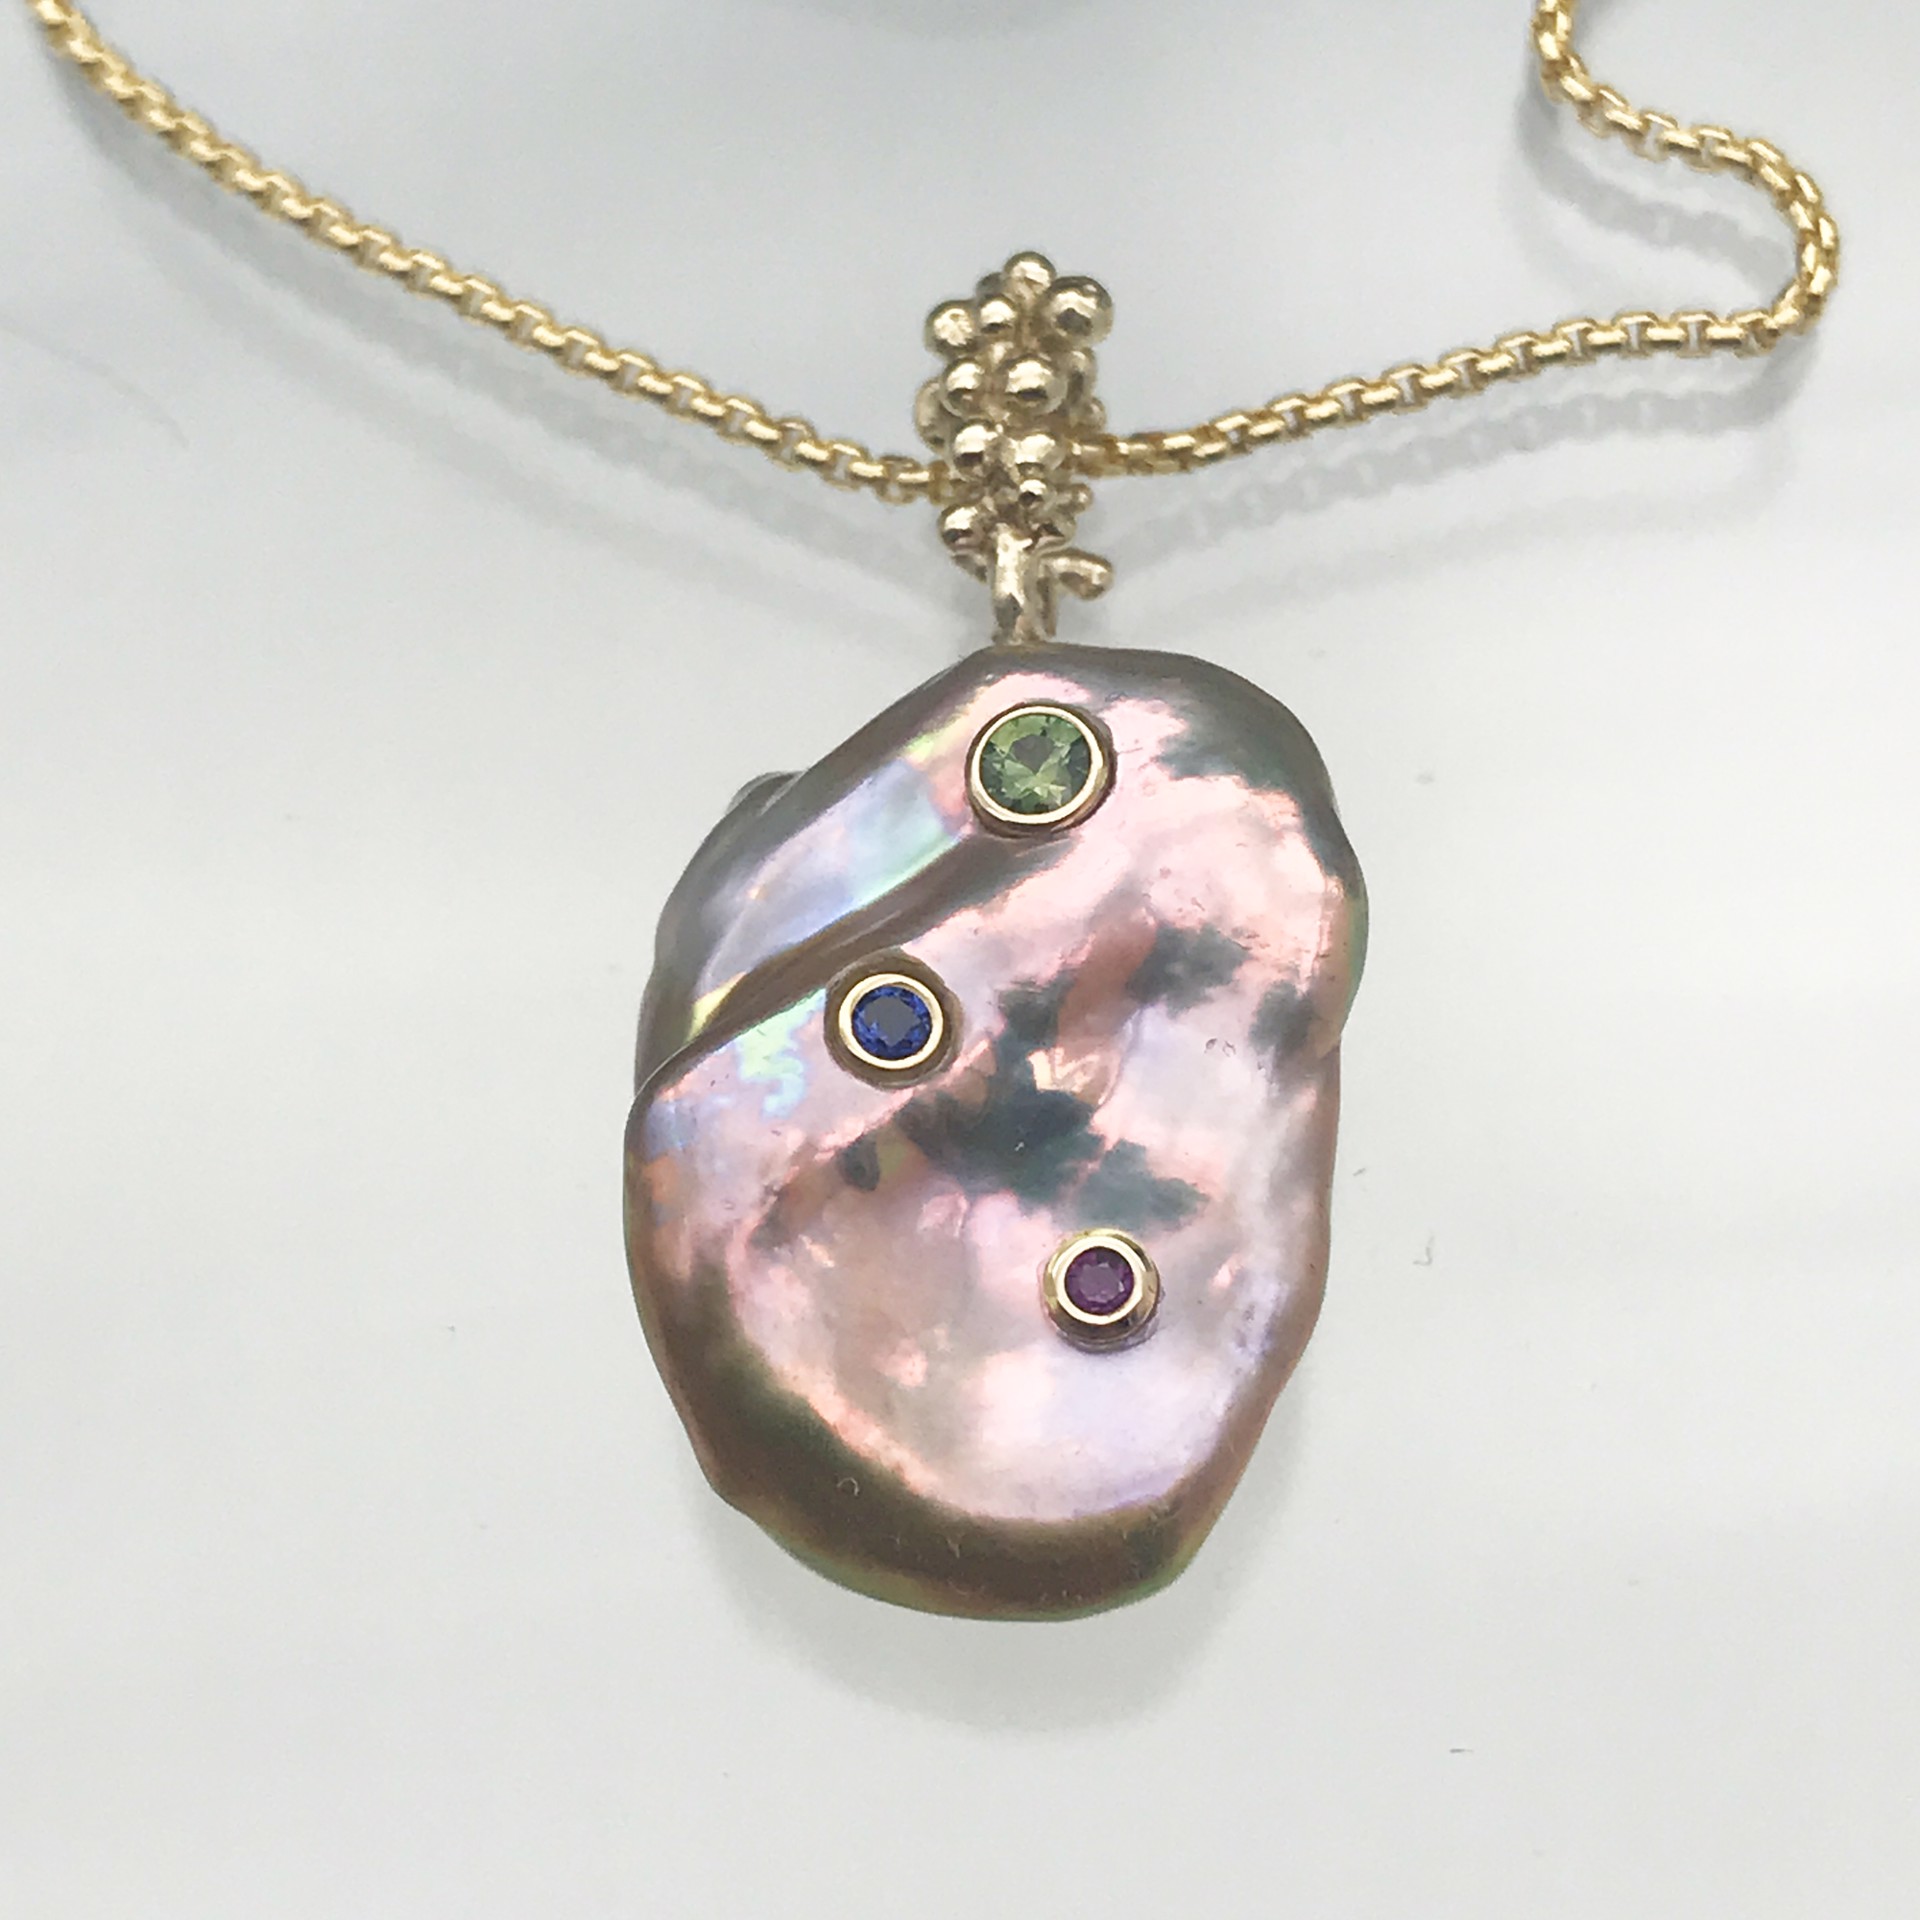 Keshi Pearl Pendant with Sapphires by Thomas Tietze